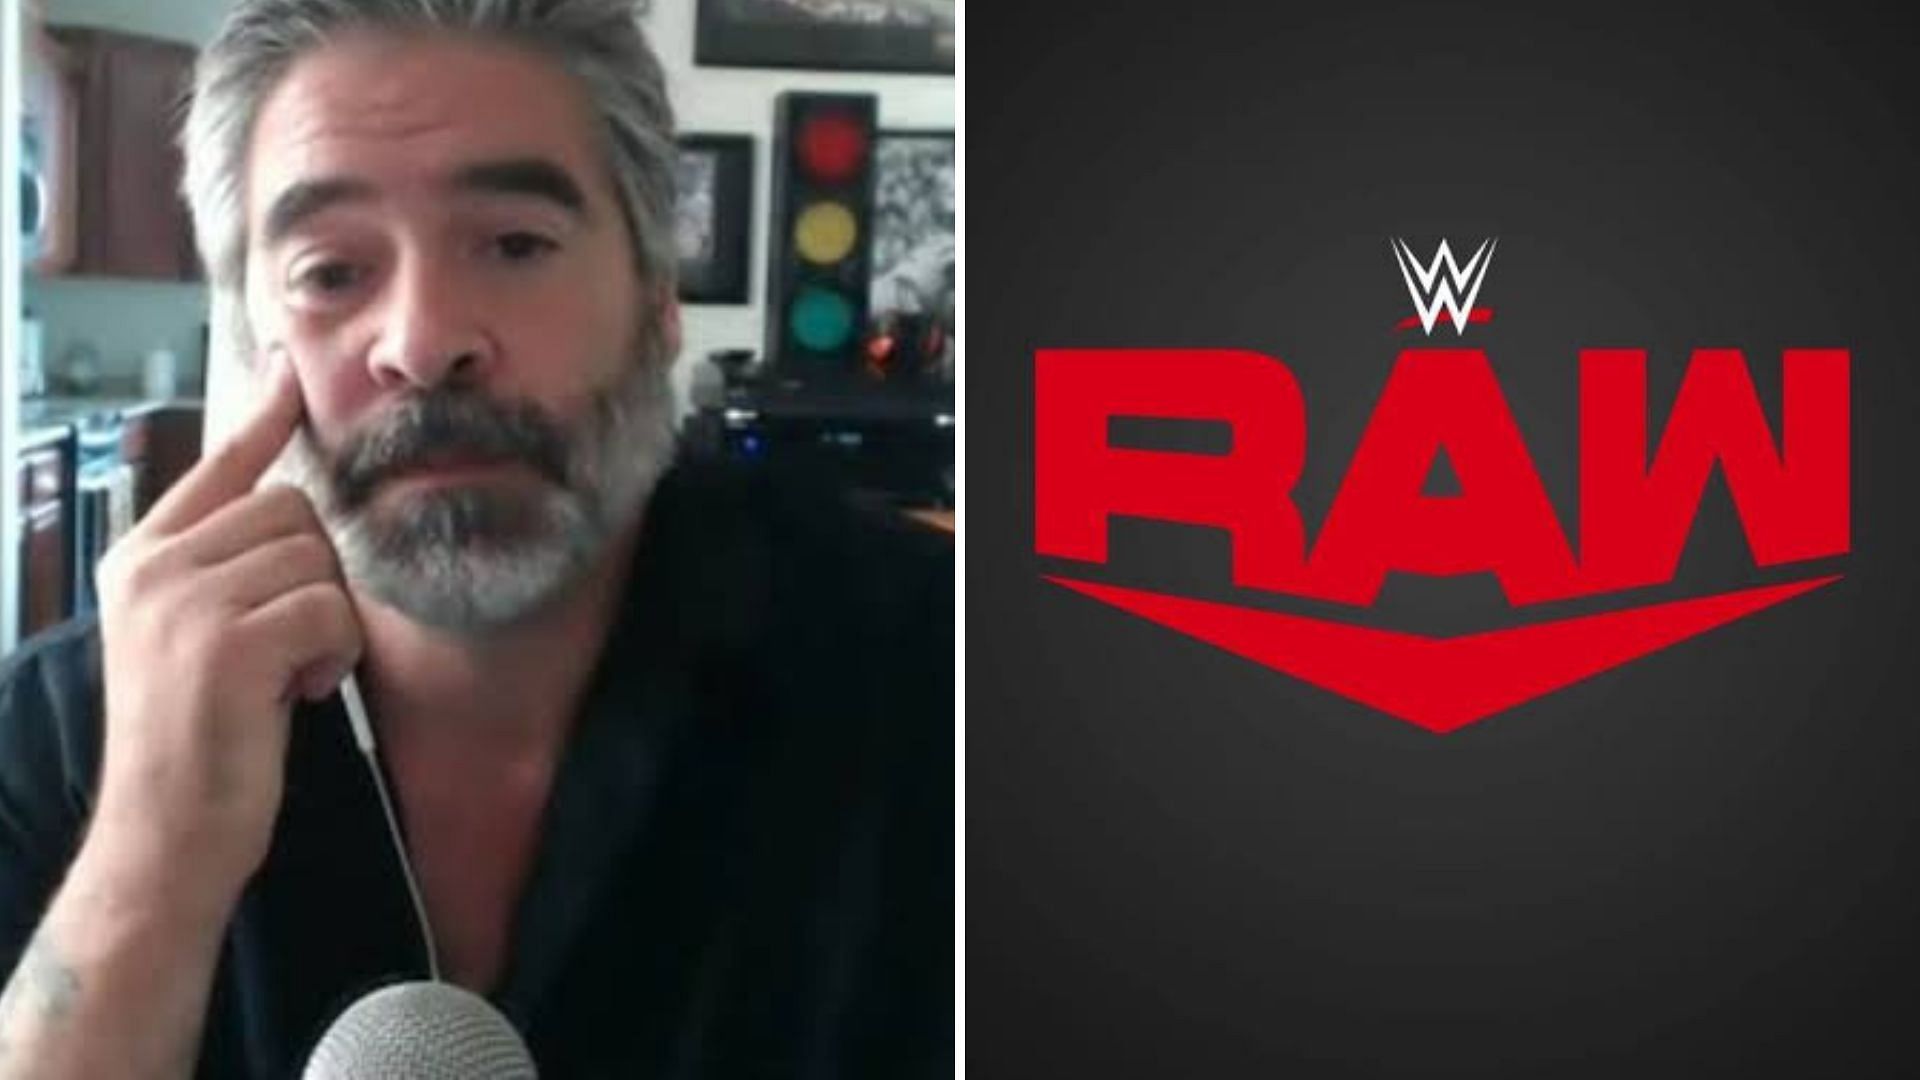 Vince Russo doesn